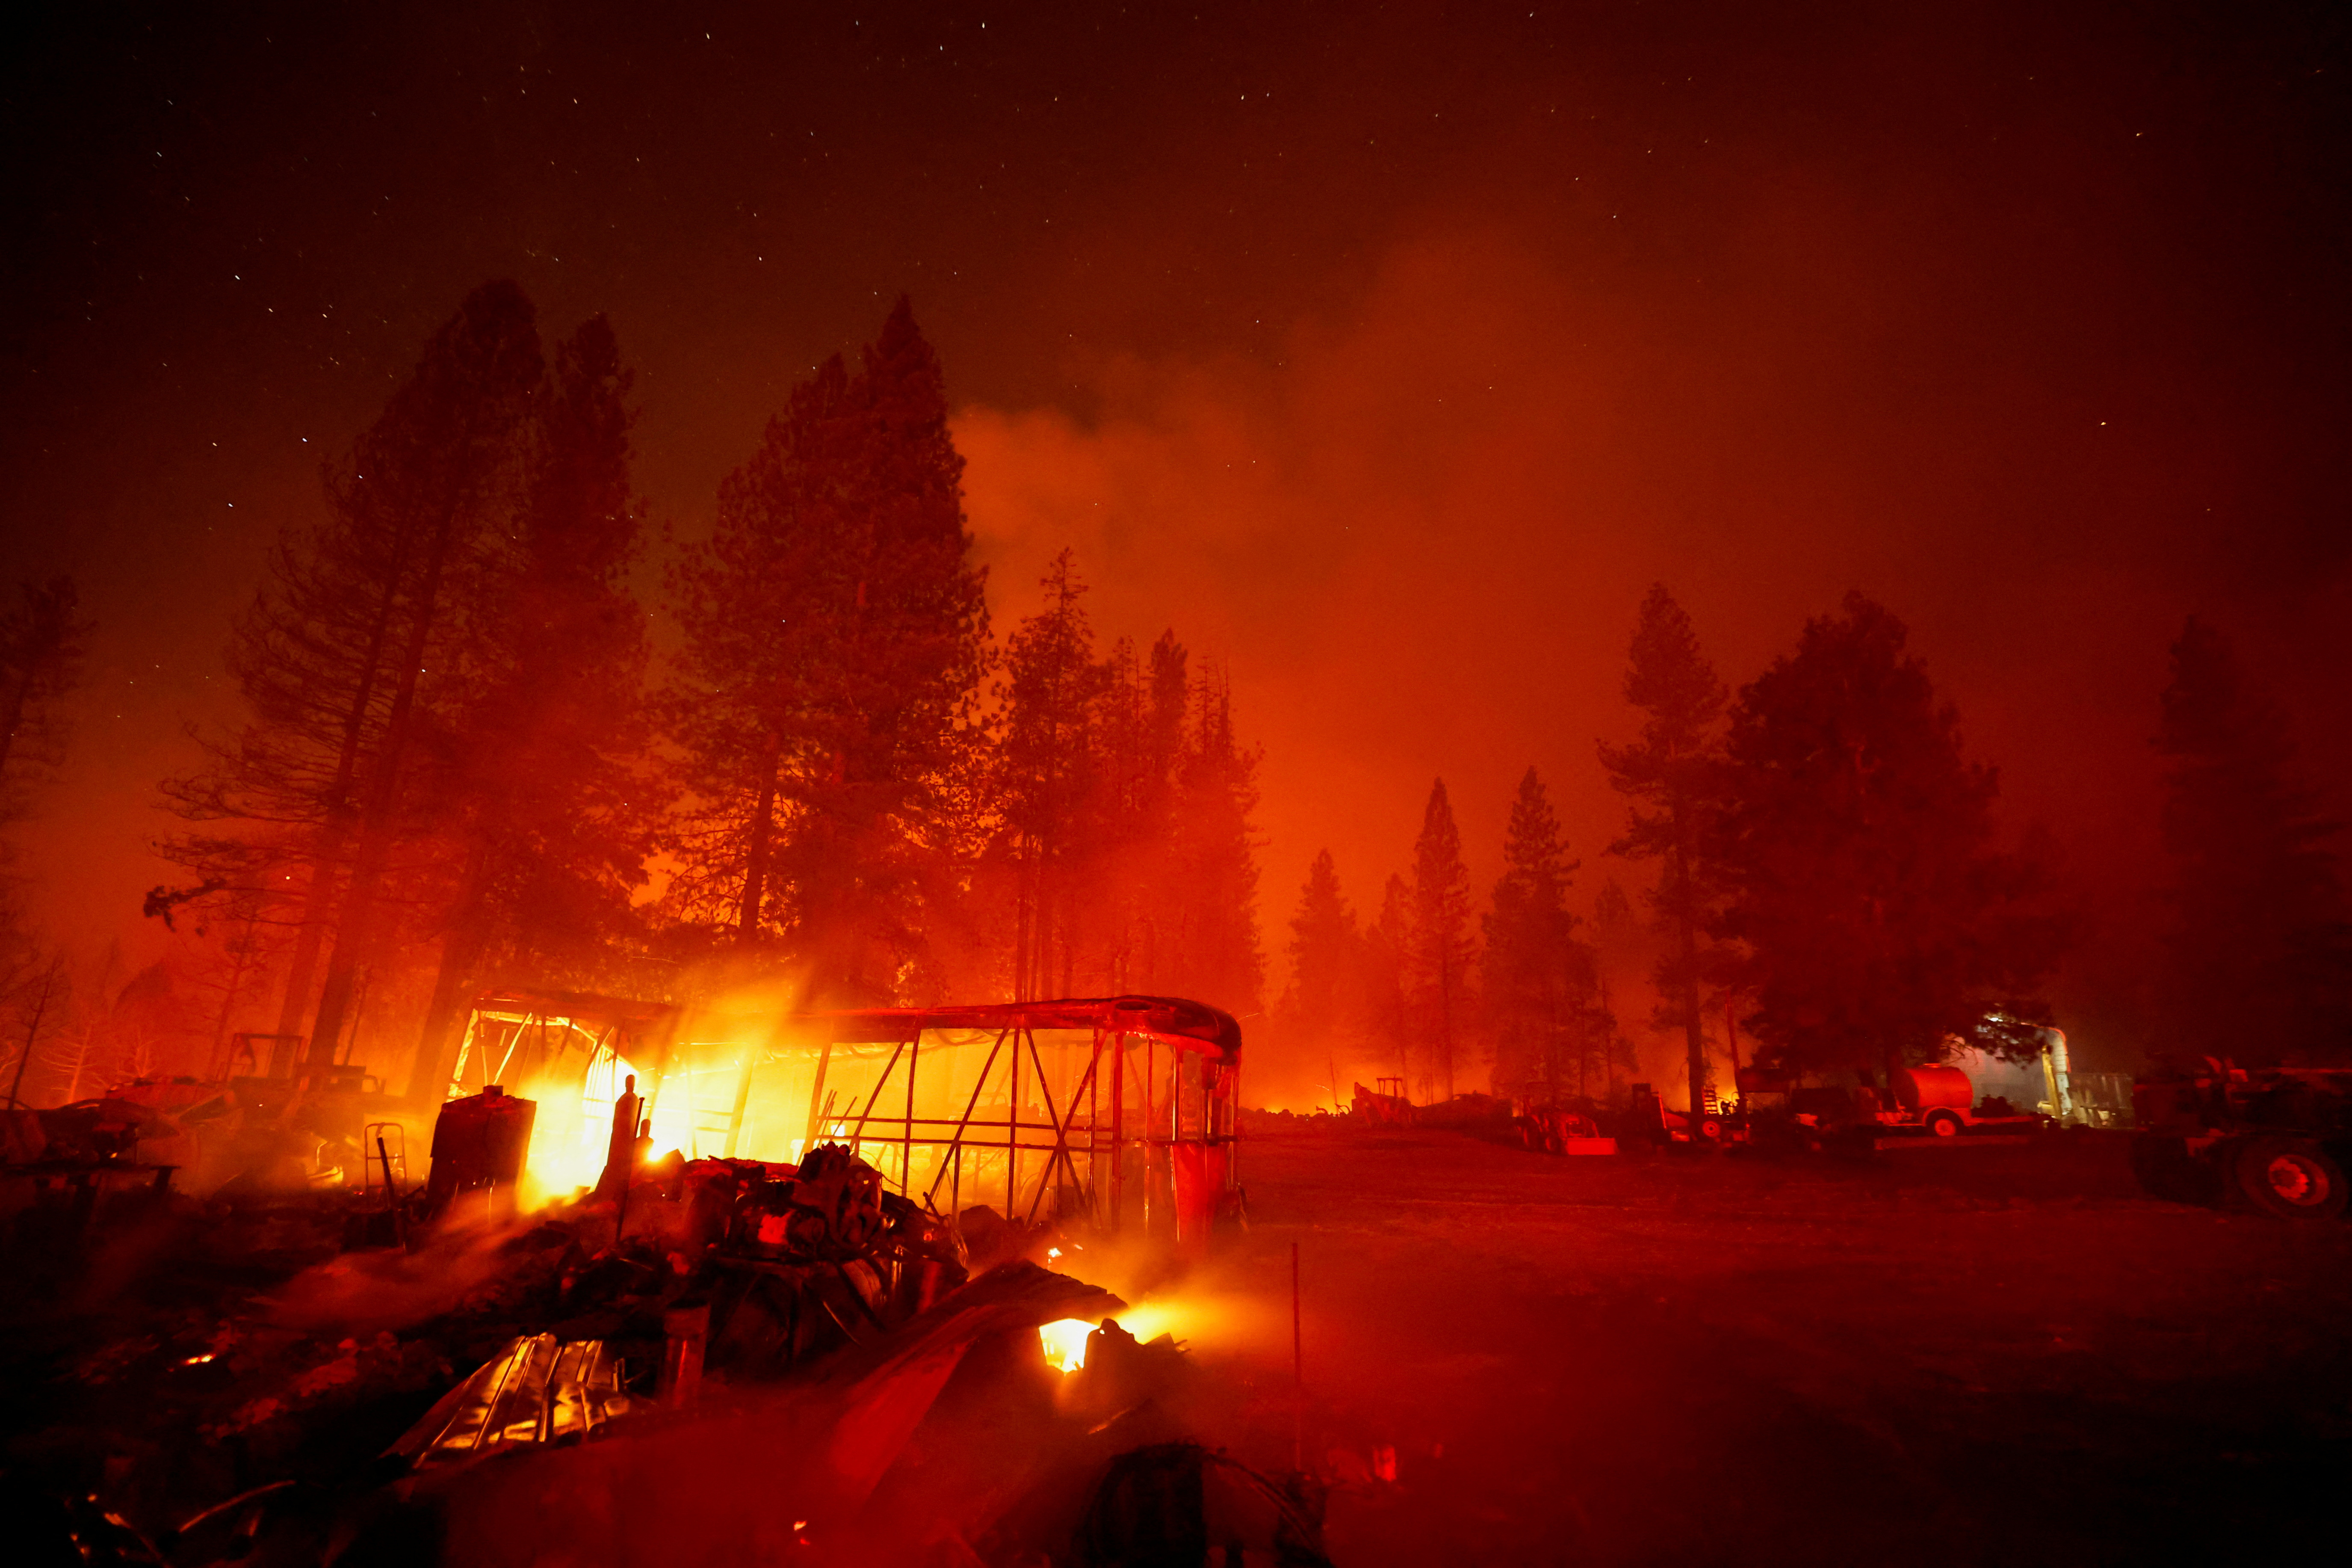 Massive fire burning in California and Nevada is spawning